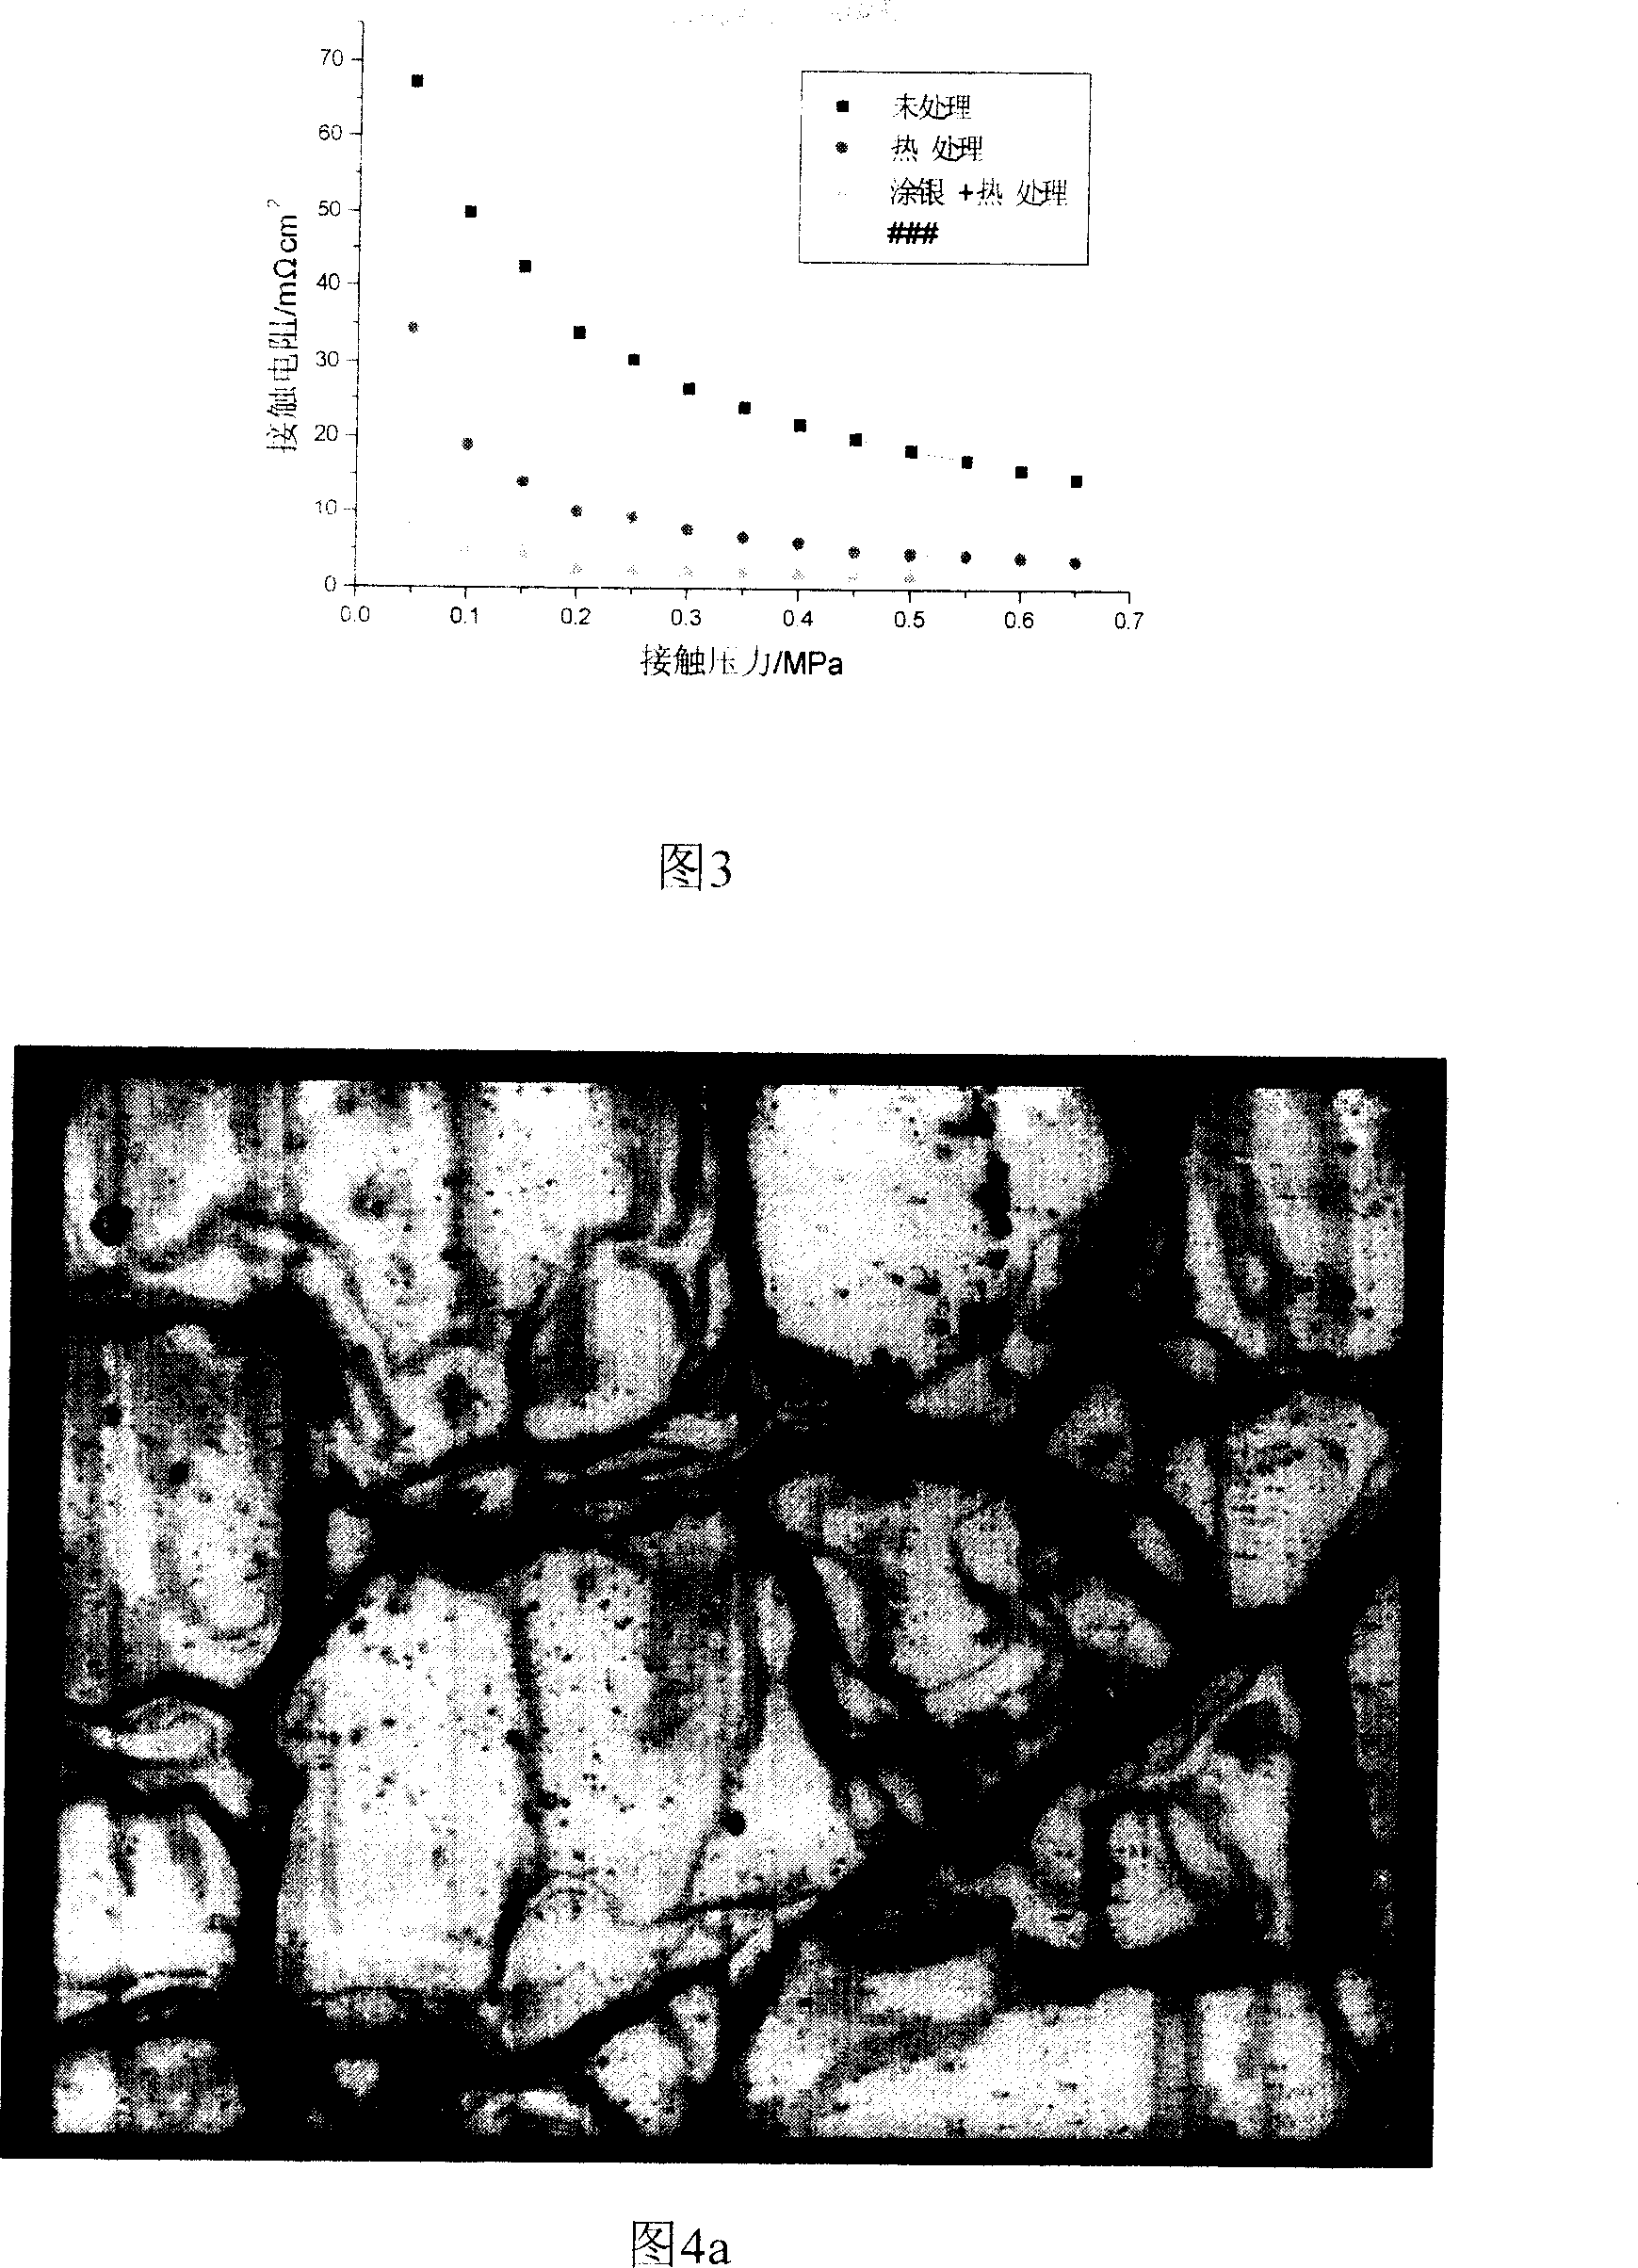 Method for preparing surface modified stainless steel as biplar plate for proton exchange membrane fuel cell